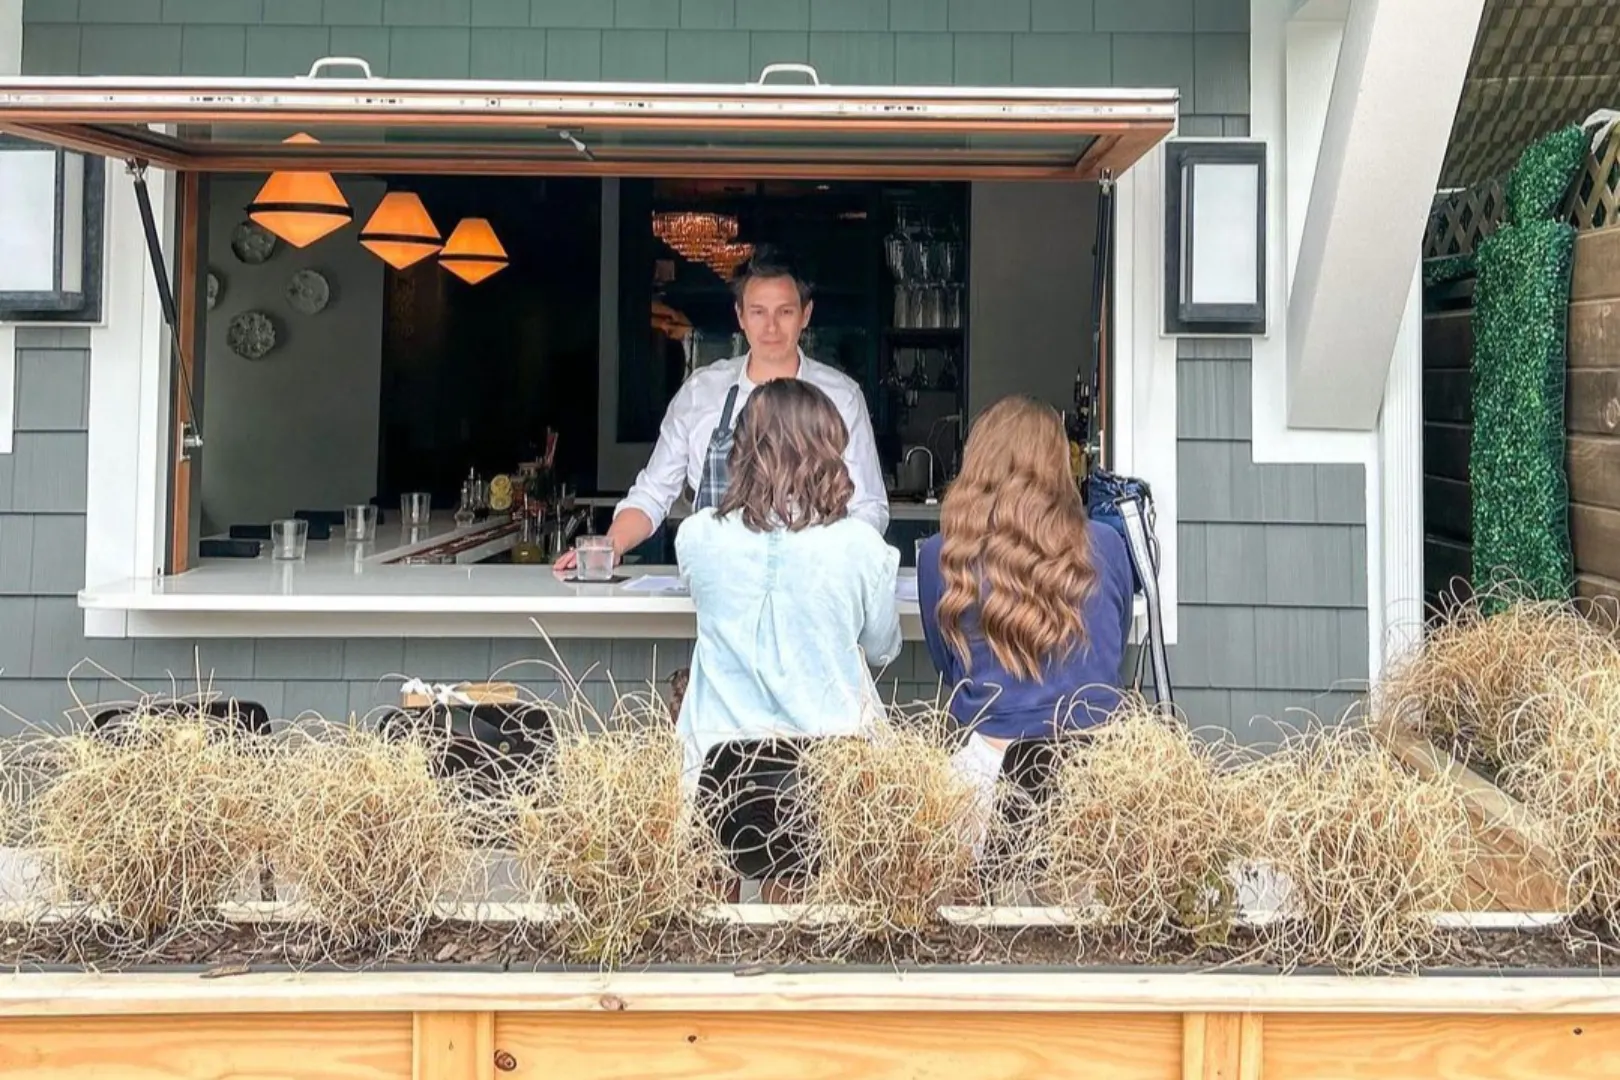 Drift now open on Baltimore Avenue in Rehoboth Beach